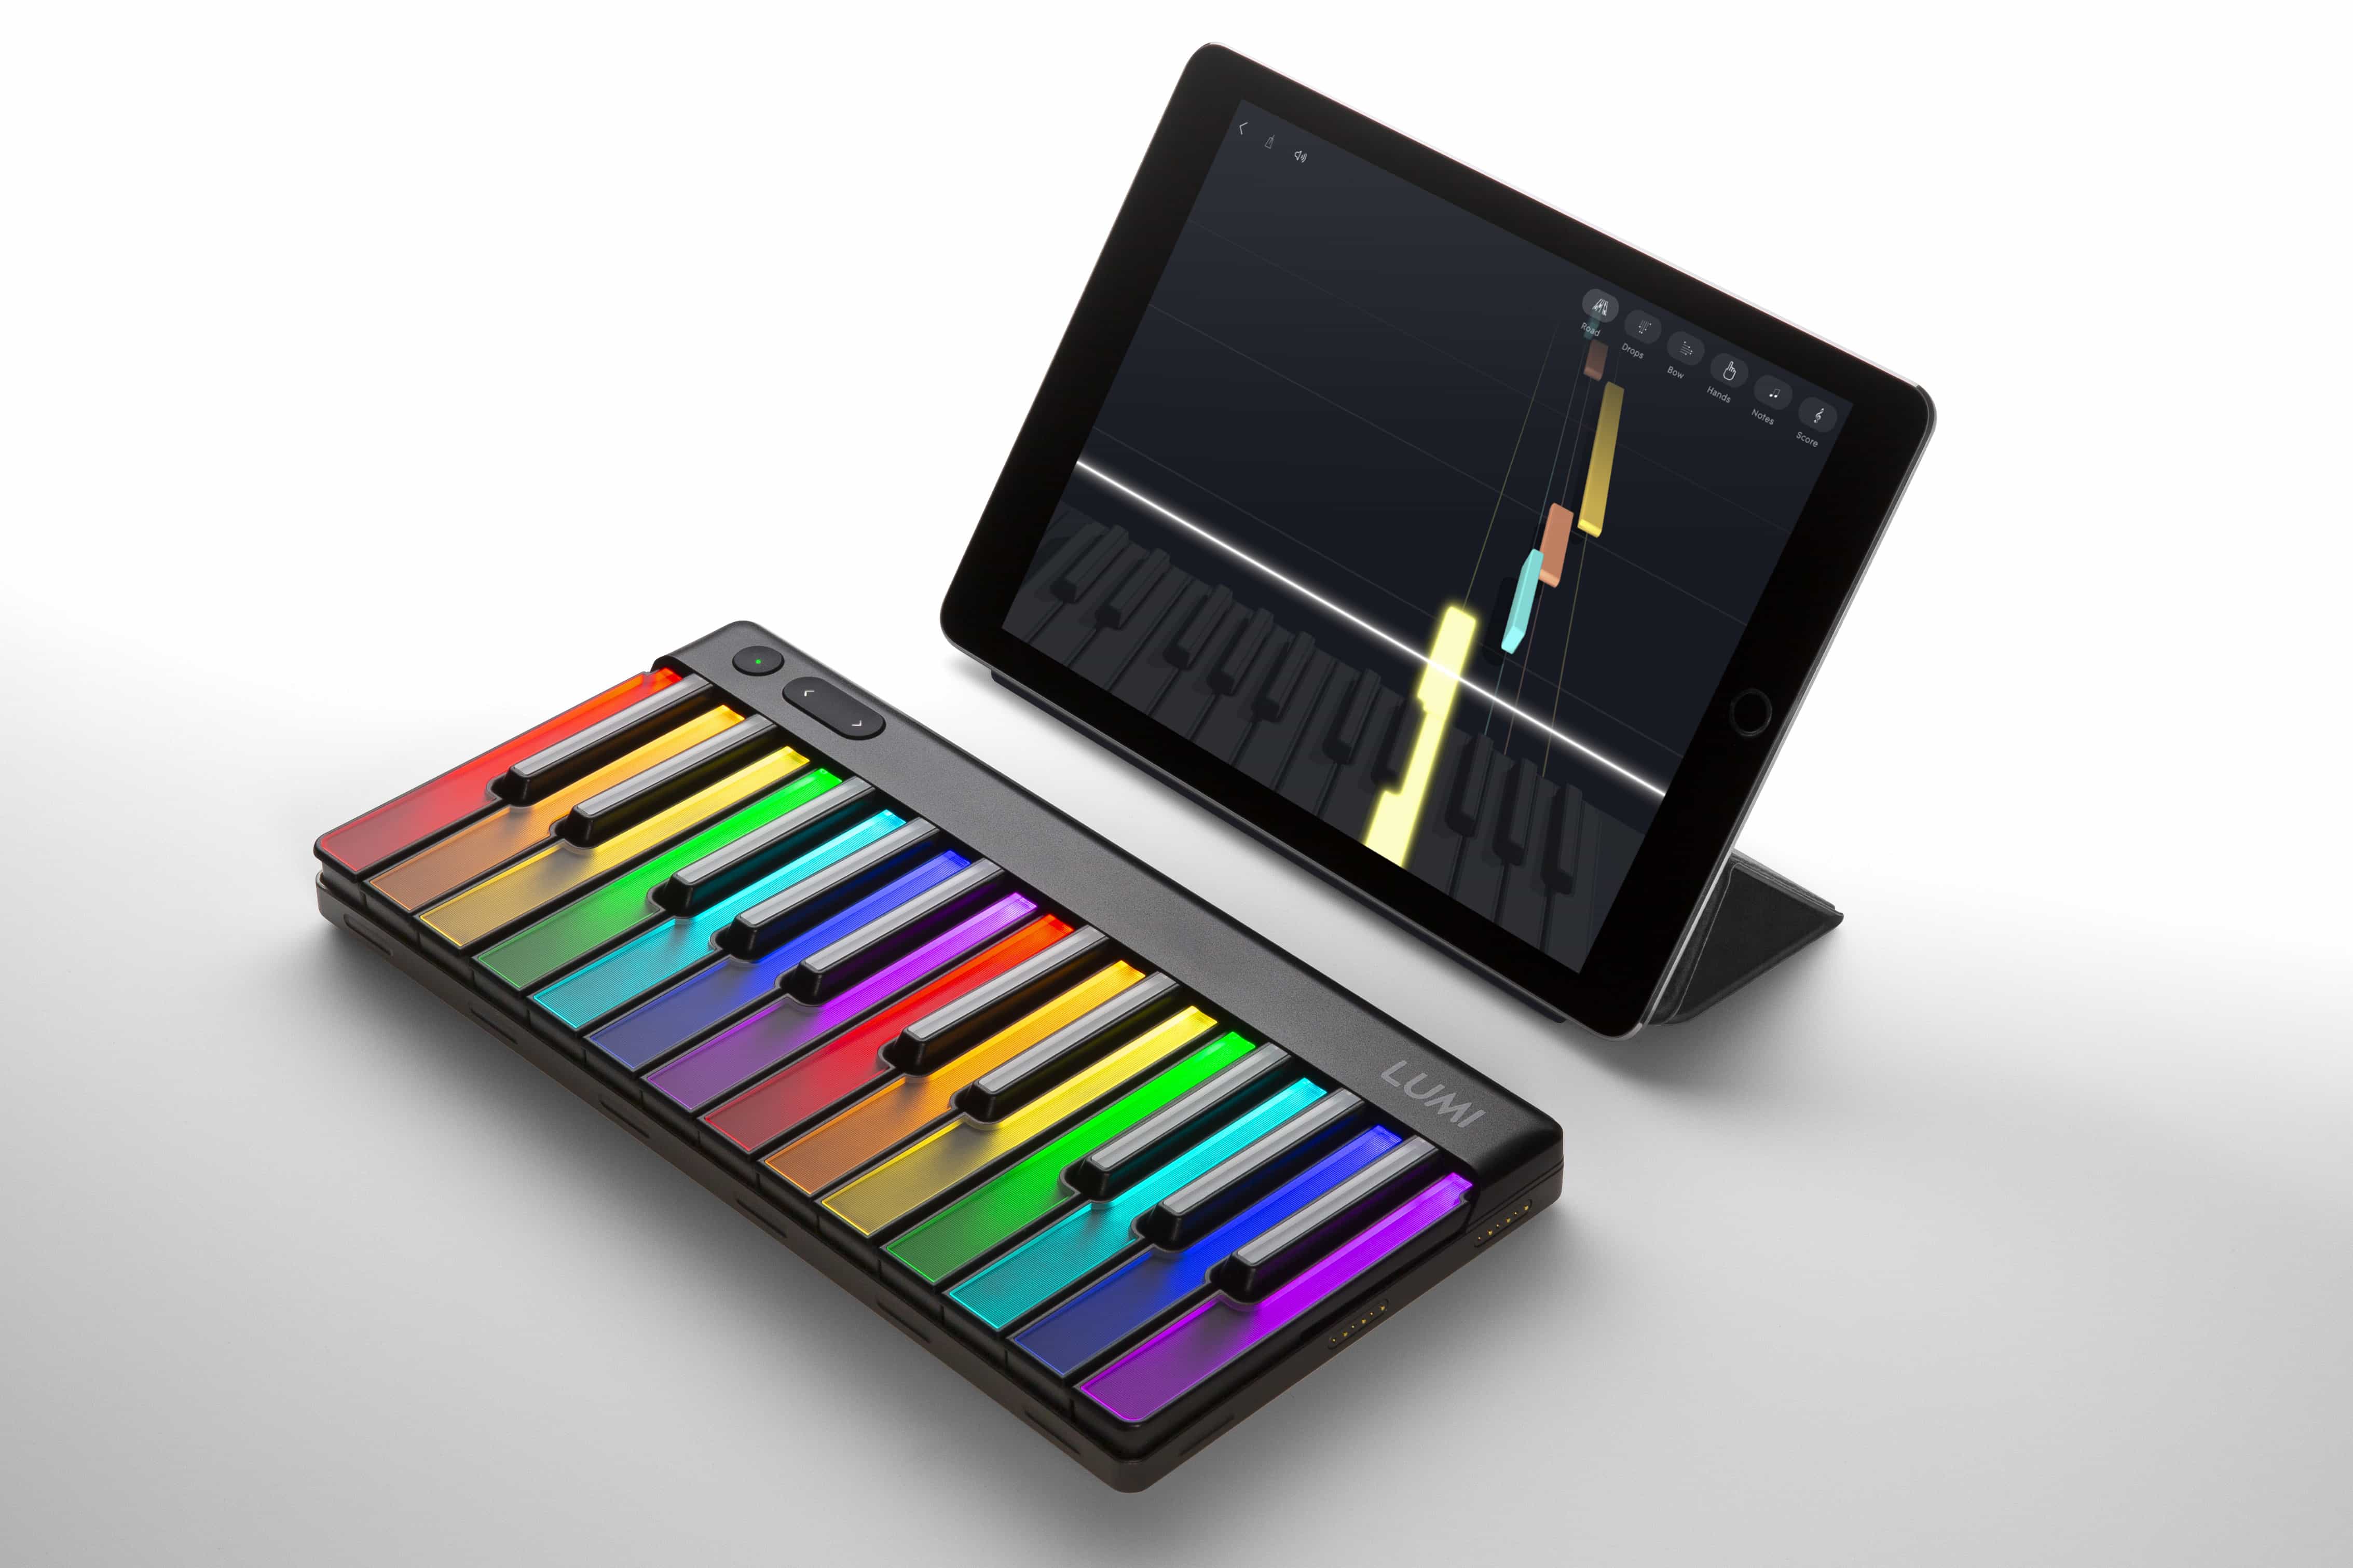 Roli Lumi keyboard lights up with pretty colors!